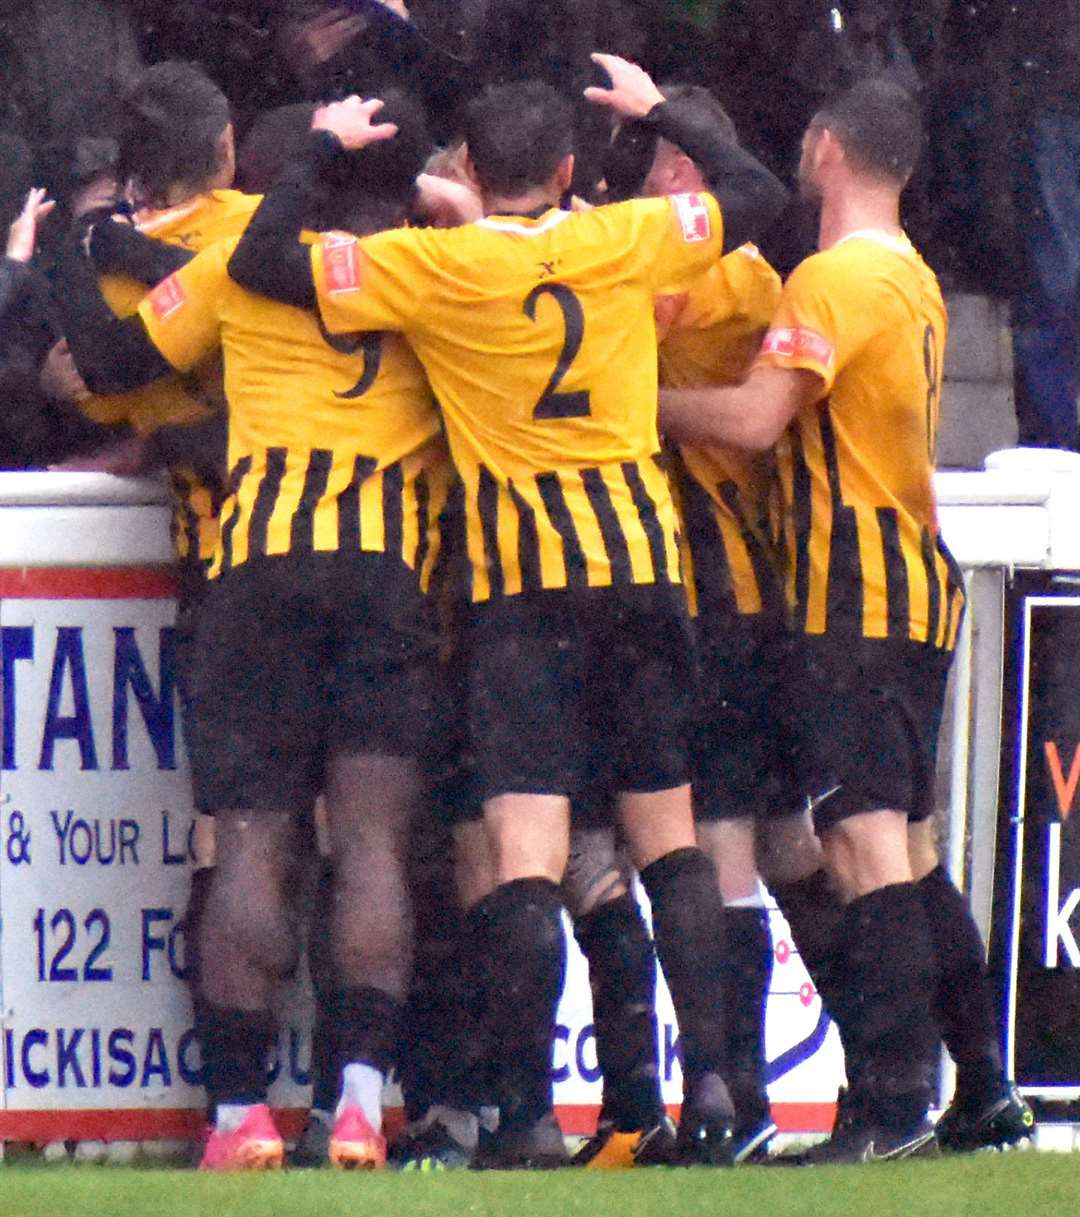 Folkestone's players celebrate Yusuff's goal - the only goal of the game - with their fans as they beat National League North Gloucester City 1-0. Picture: Randolph File